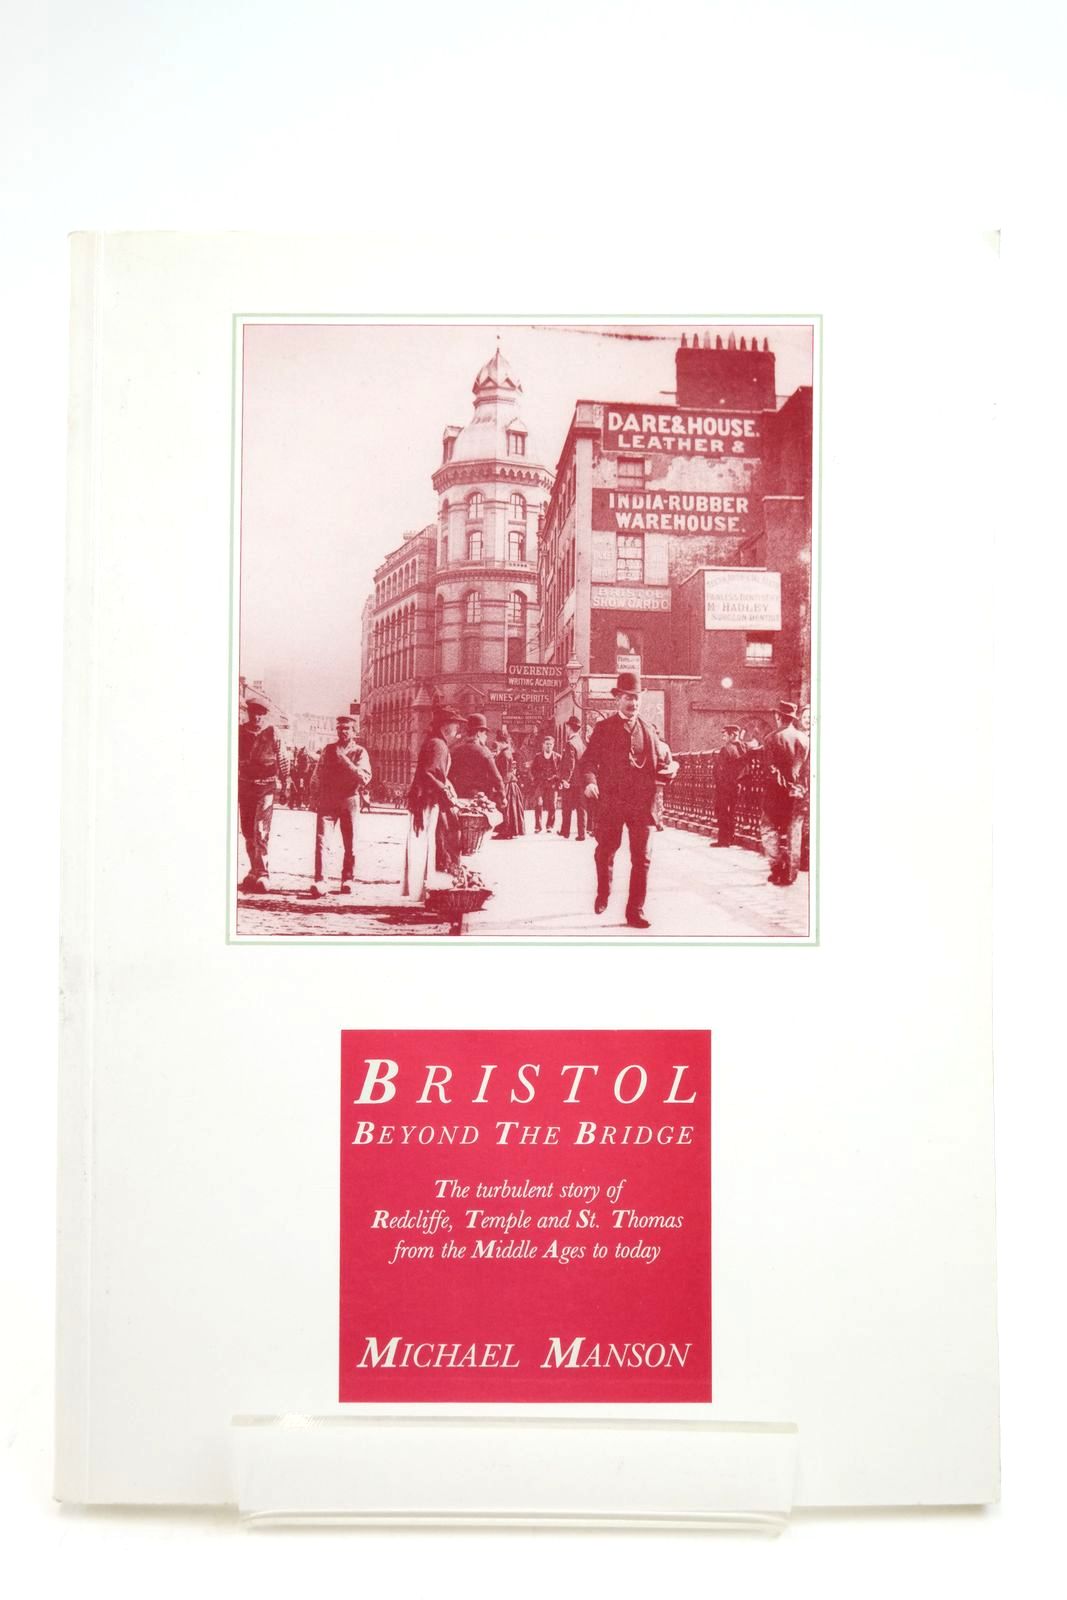 Photo of BRISTOL BEYOND THE BRIDGE written by Manson, Michael published by Redcliffe Press Ltd. (STOCK CODE: 2138846)  for sale by Stella & Rose's Books